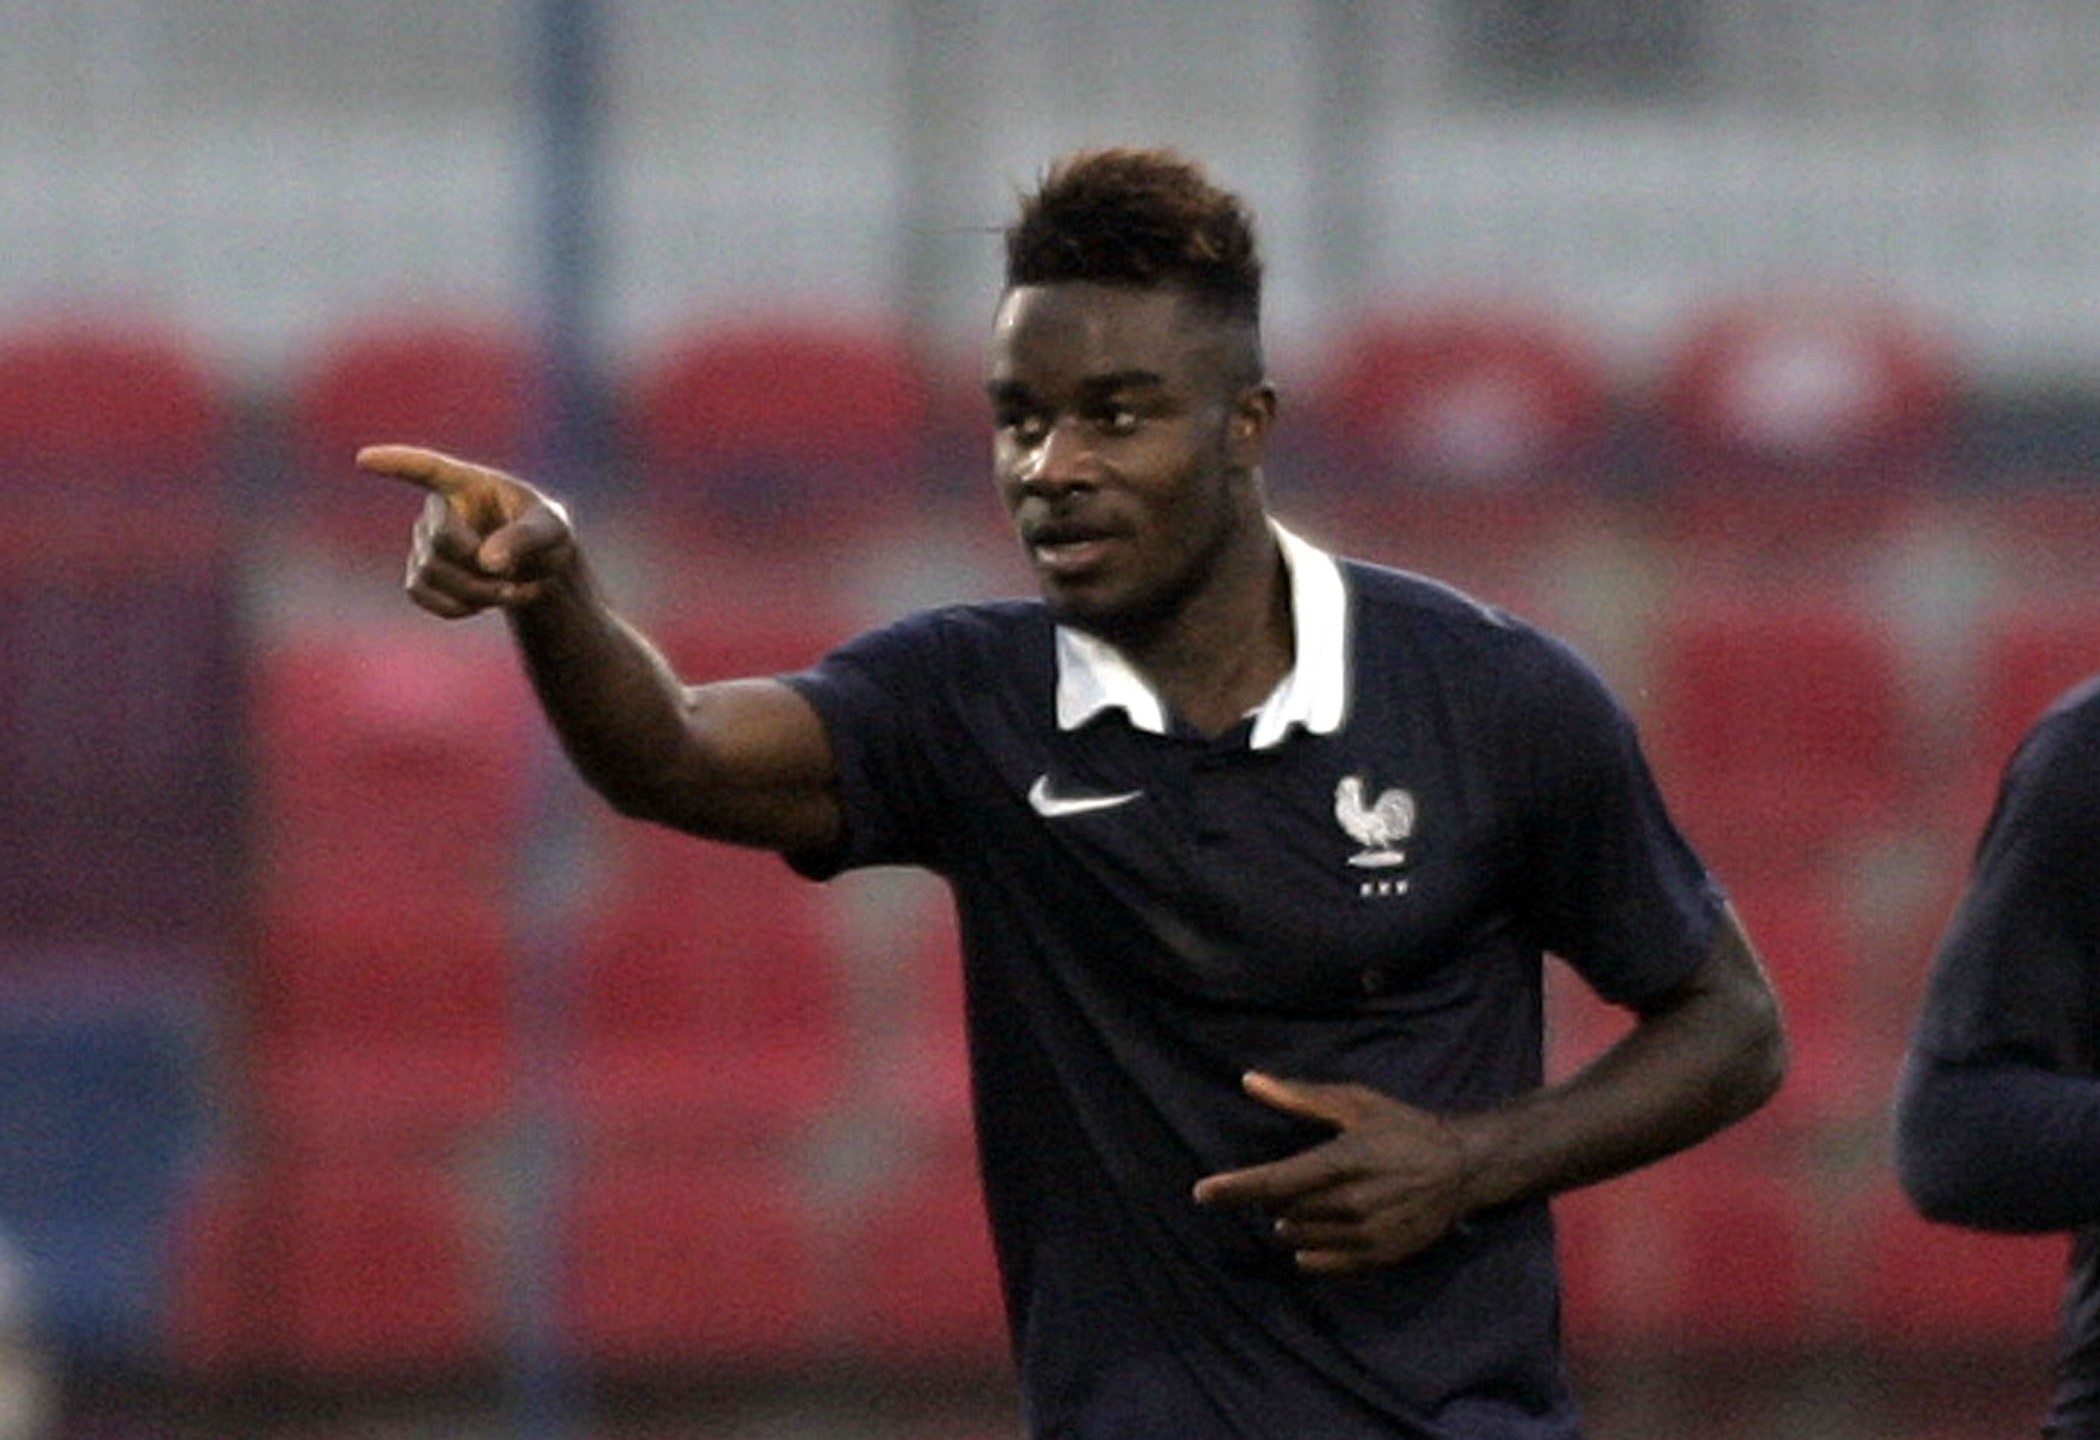 VERIA, GREECE - NOVEMBER 17: Maxwel Gnaly Cornet   of  France geaticulate after scoring a goal during the UEFA U-19 Friendly Tournament match between  France vs Germany at  Stadium Veria  on  November 17, 2014 in Veria, Greece  (Photo by Milos Bicanski/Getty Images) *** Local Caption***